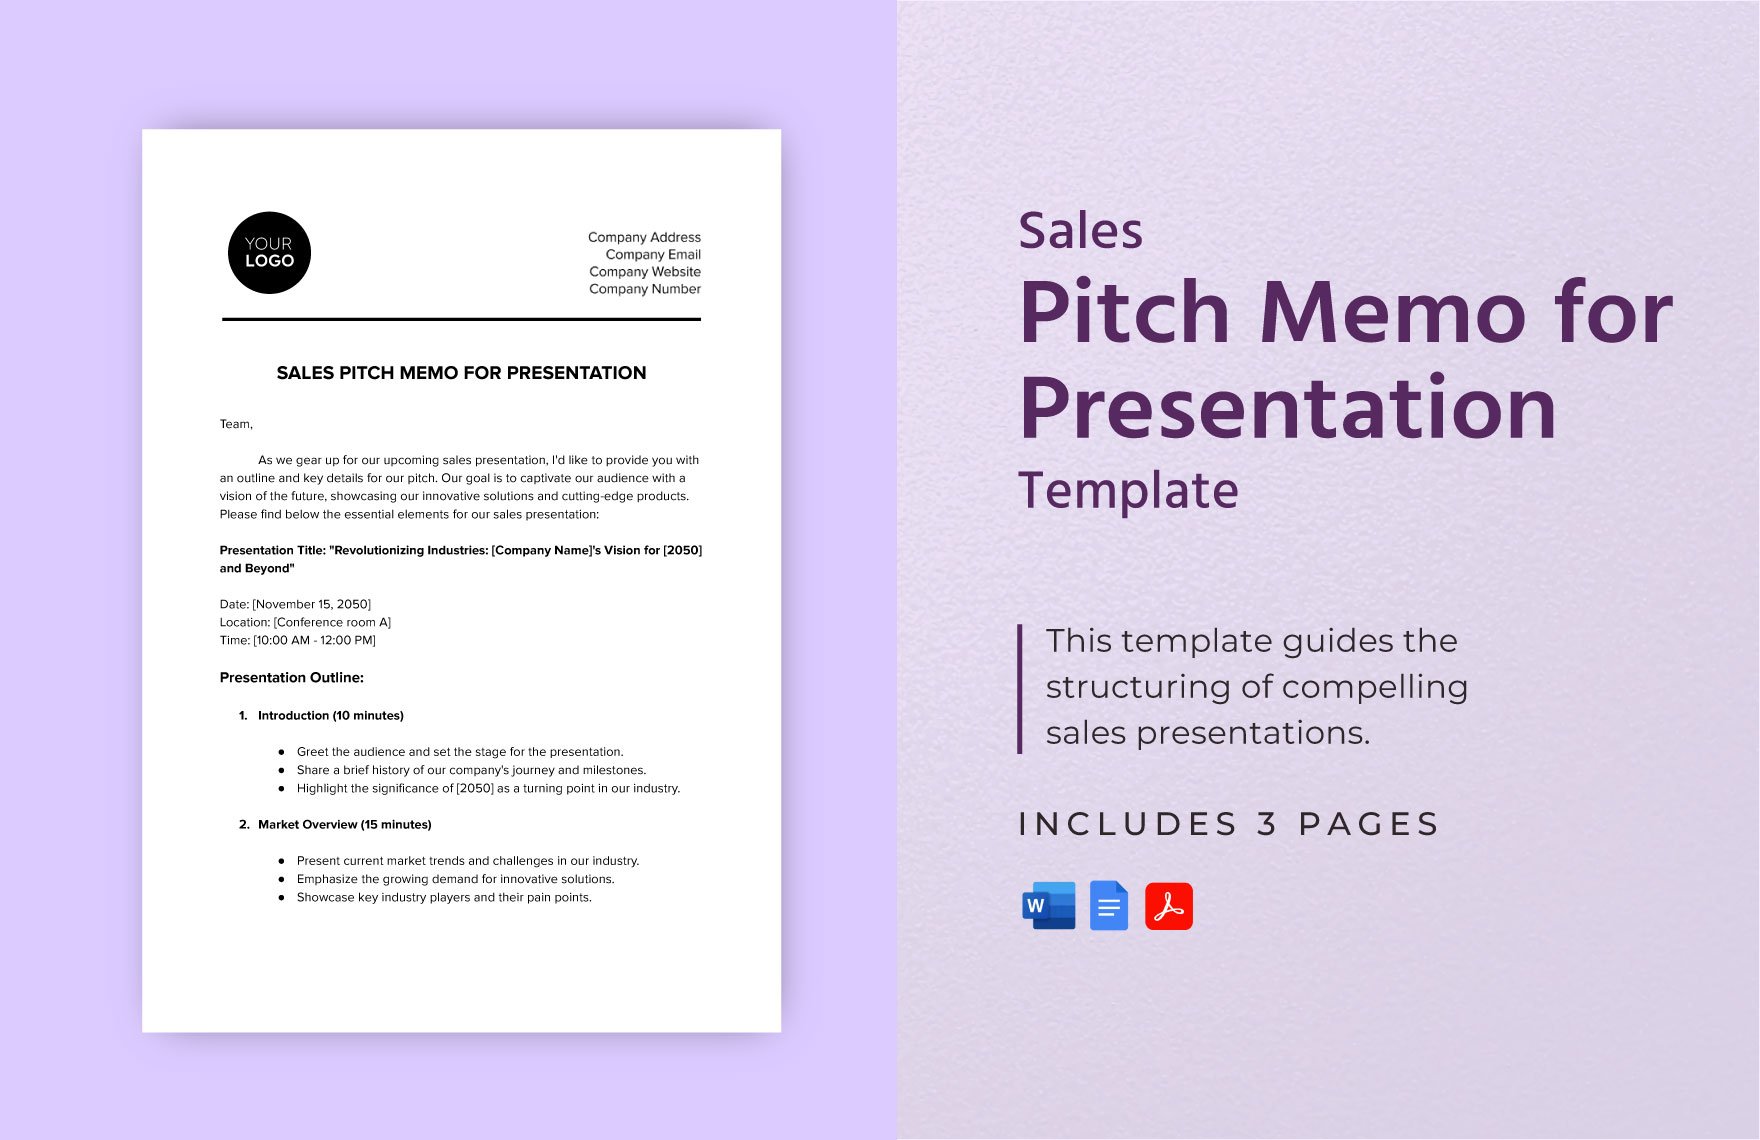 Sales Pitch Memo for Presentation Template